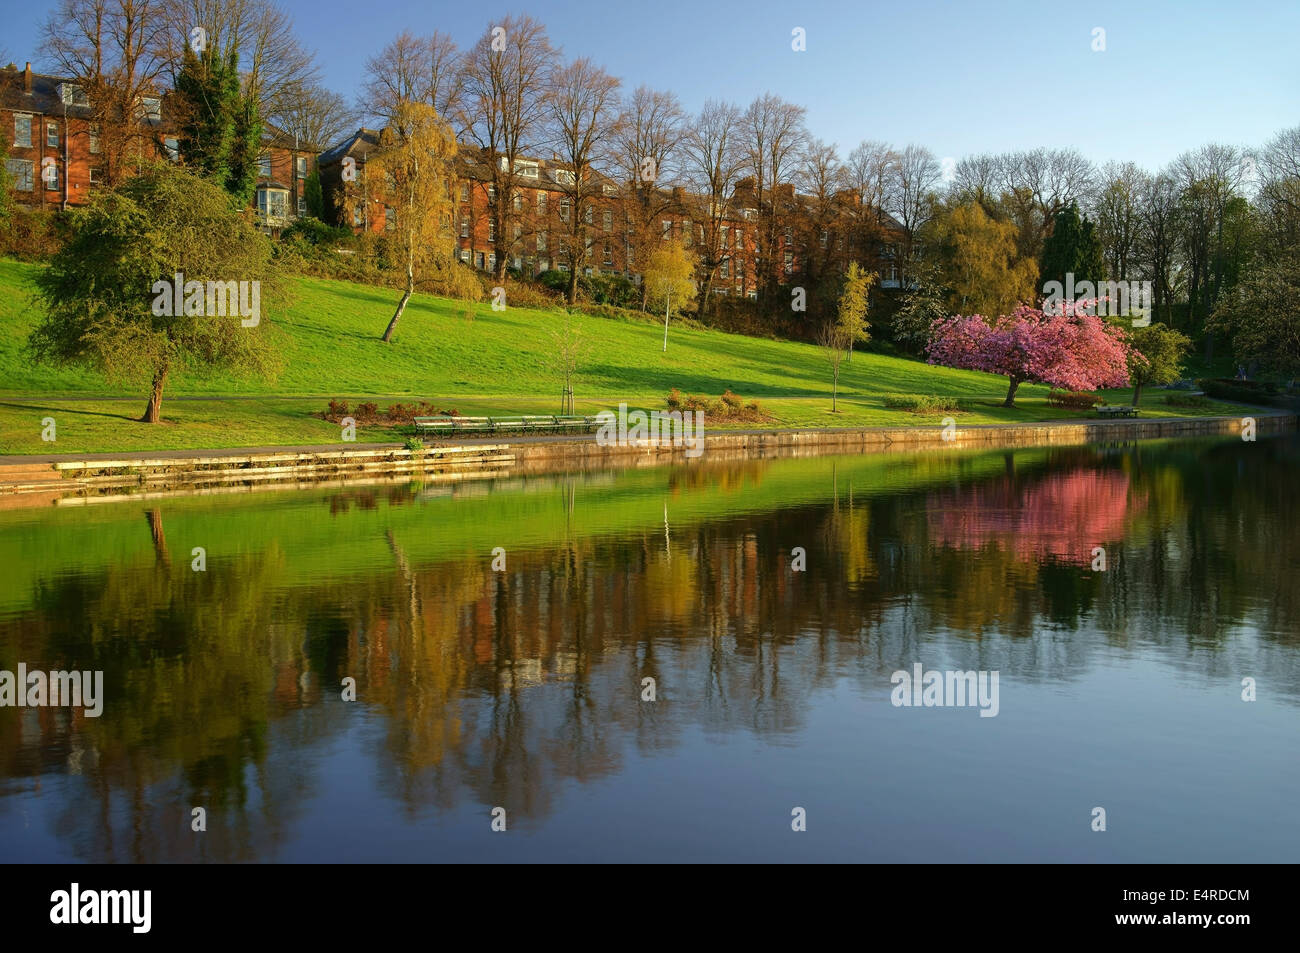 UK,South Yorkshire,Sheffield,Crookes Valley Park, Reflections of Trees & Blossum Stock Photo